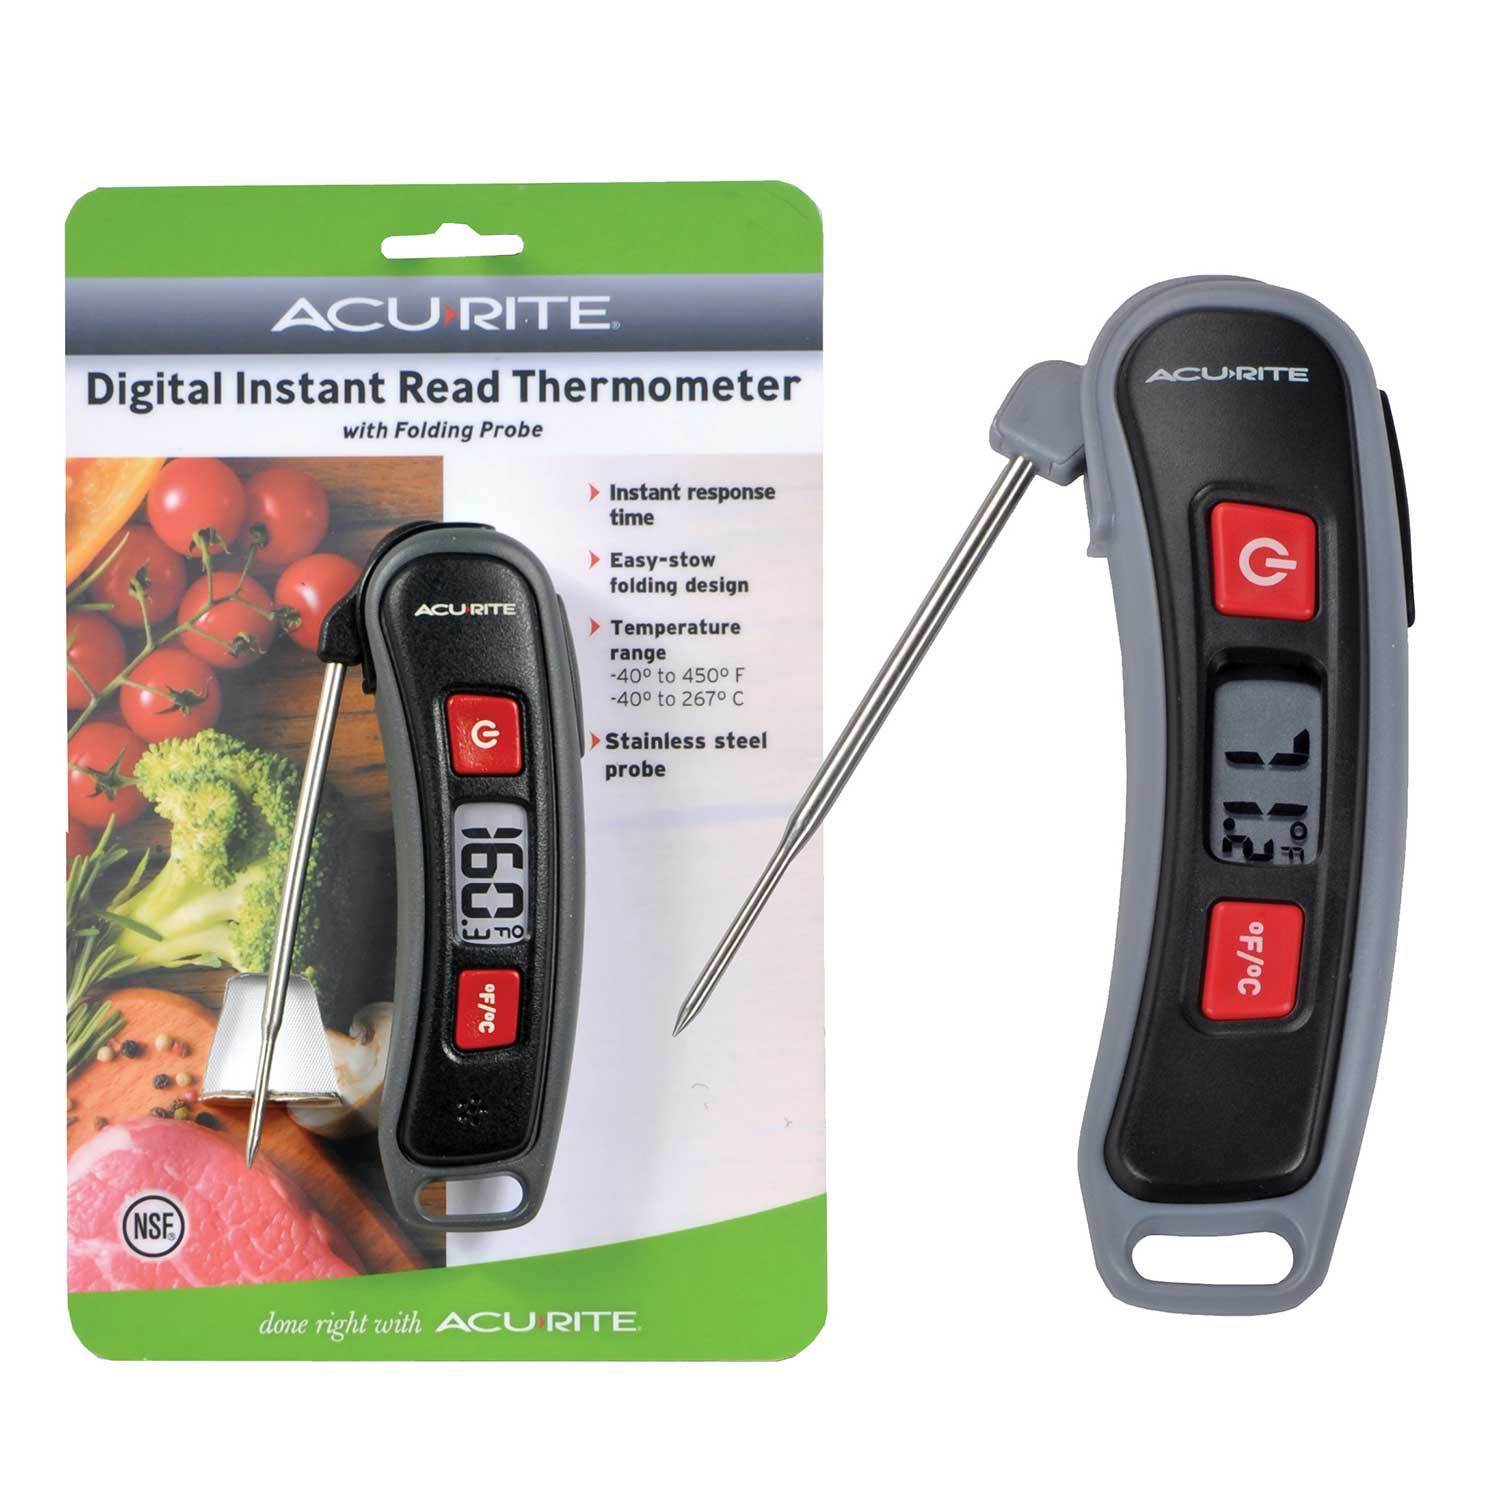 https://assets.mydeal.com.au/48296/acurite-digital-instant-read-thermometer-with-folding-probe-7488302_00.jpg?v=638331489952739031